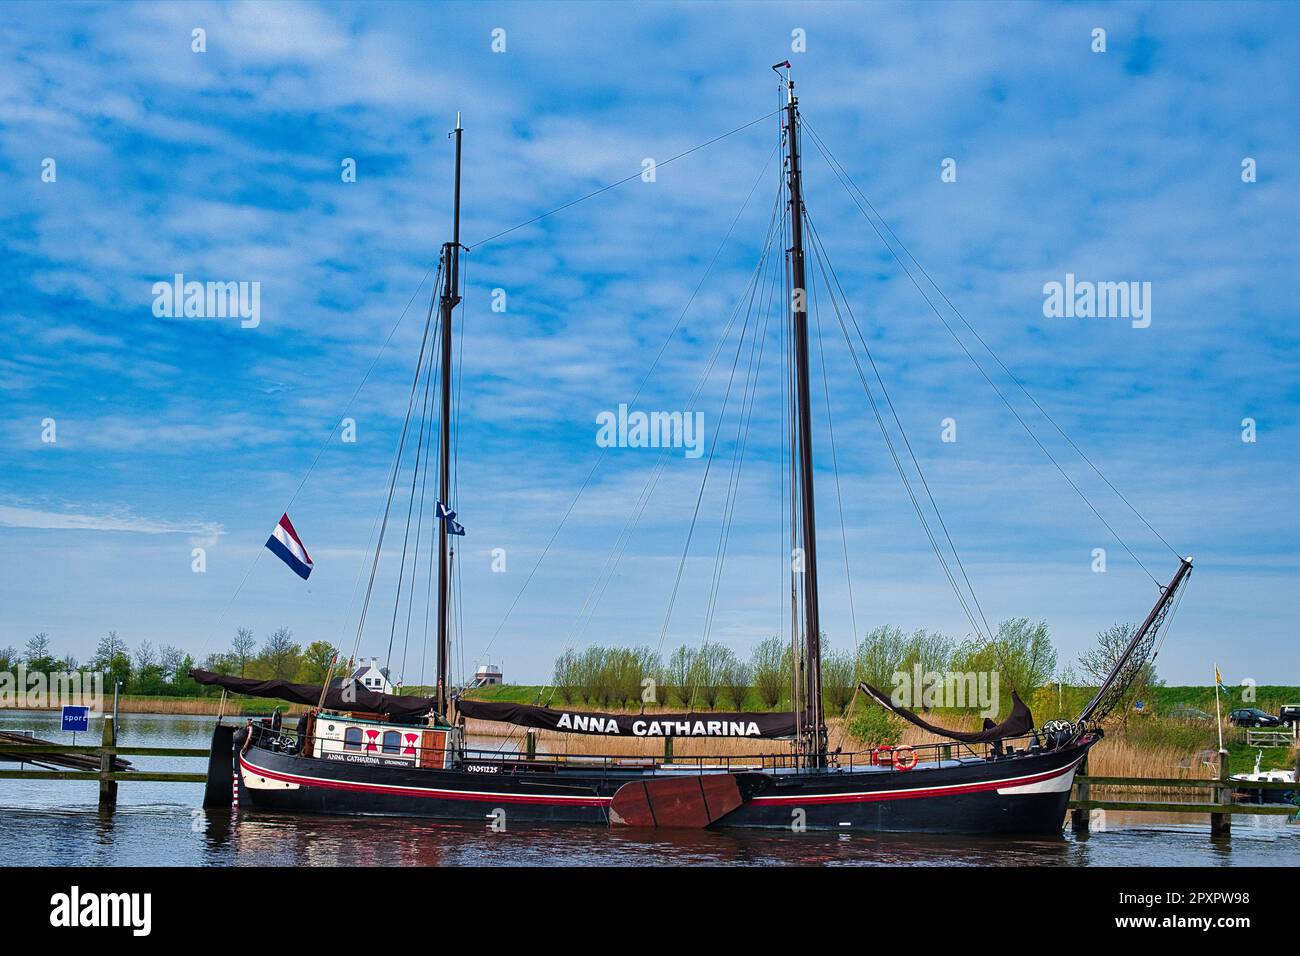 A  clipper barge (klipperaak), a traditional Dutch sailing barge, now used for recreational purposes, in the harbour of Zoutkamp, the Netherlands Stock Photo